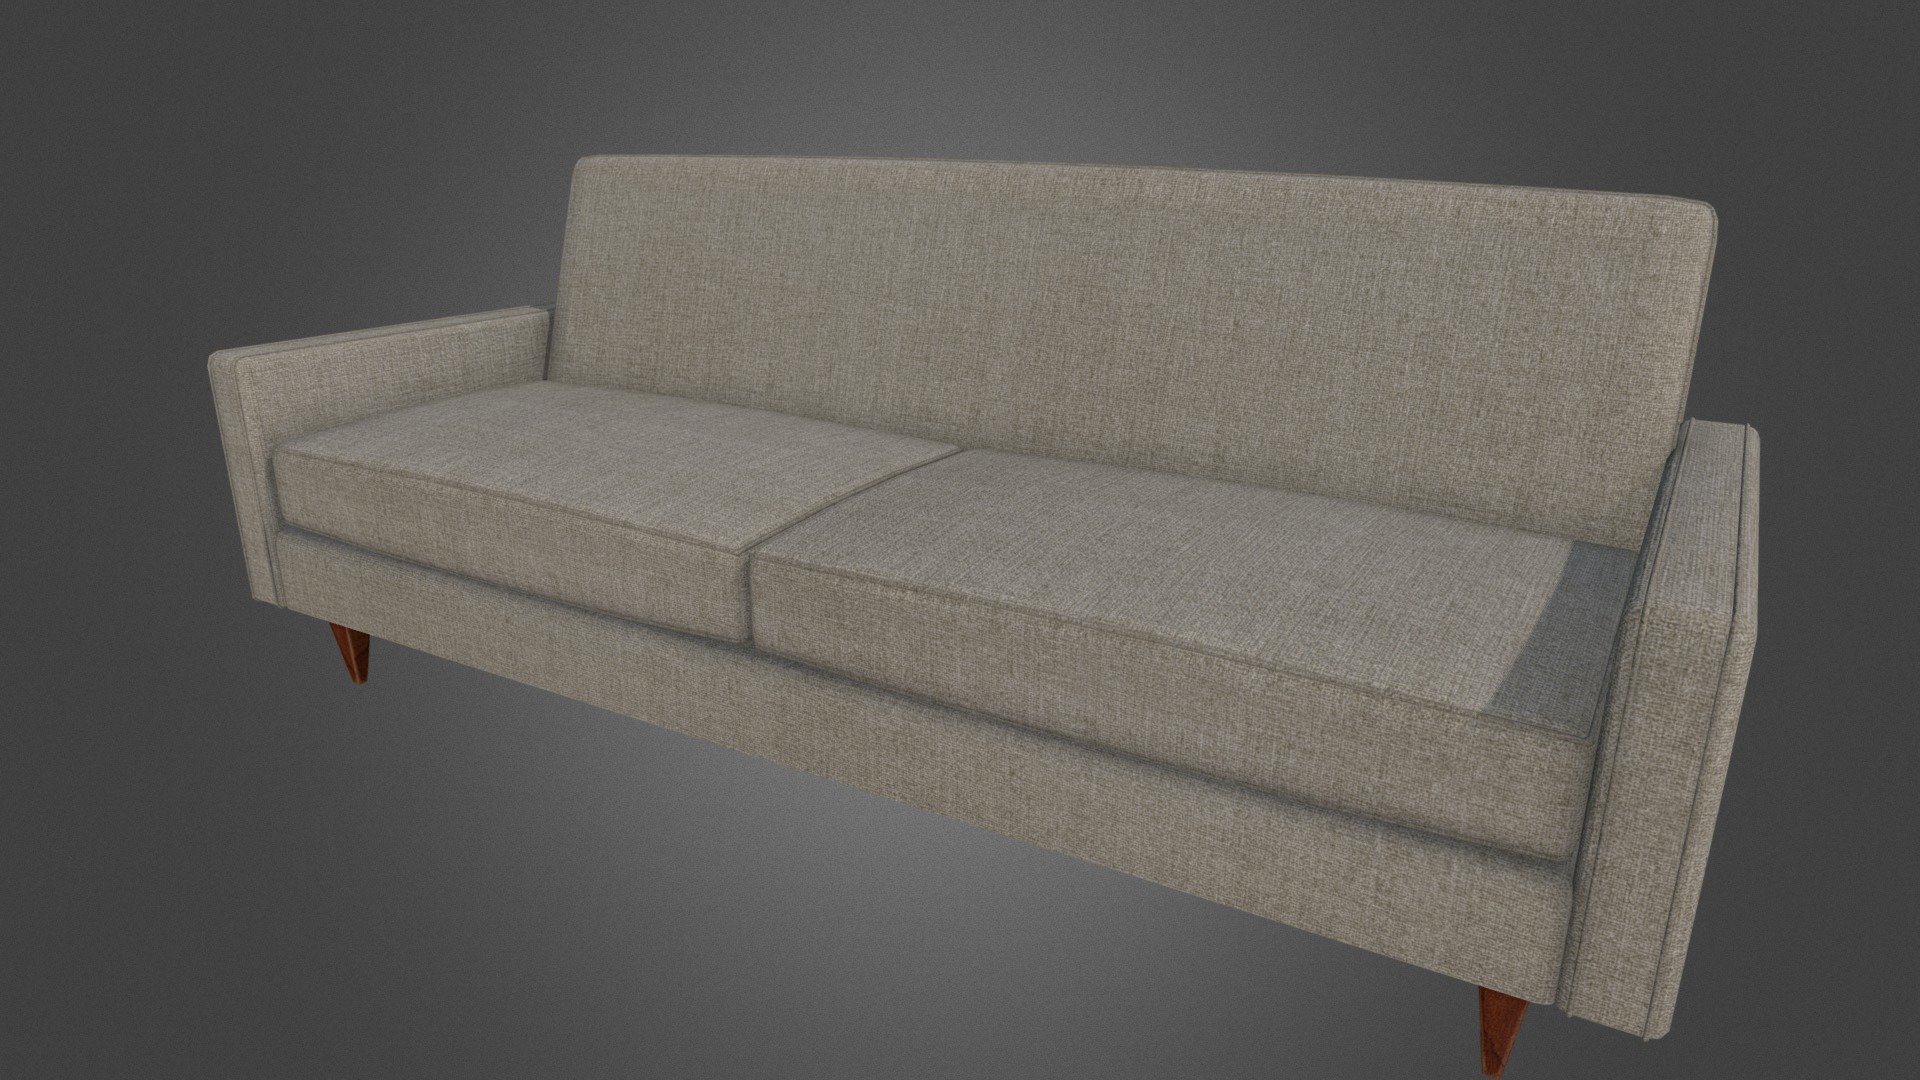 Fabric couch model - Couch Fabric - 3D model by the7isbest 3d model